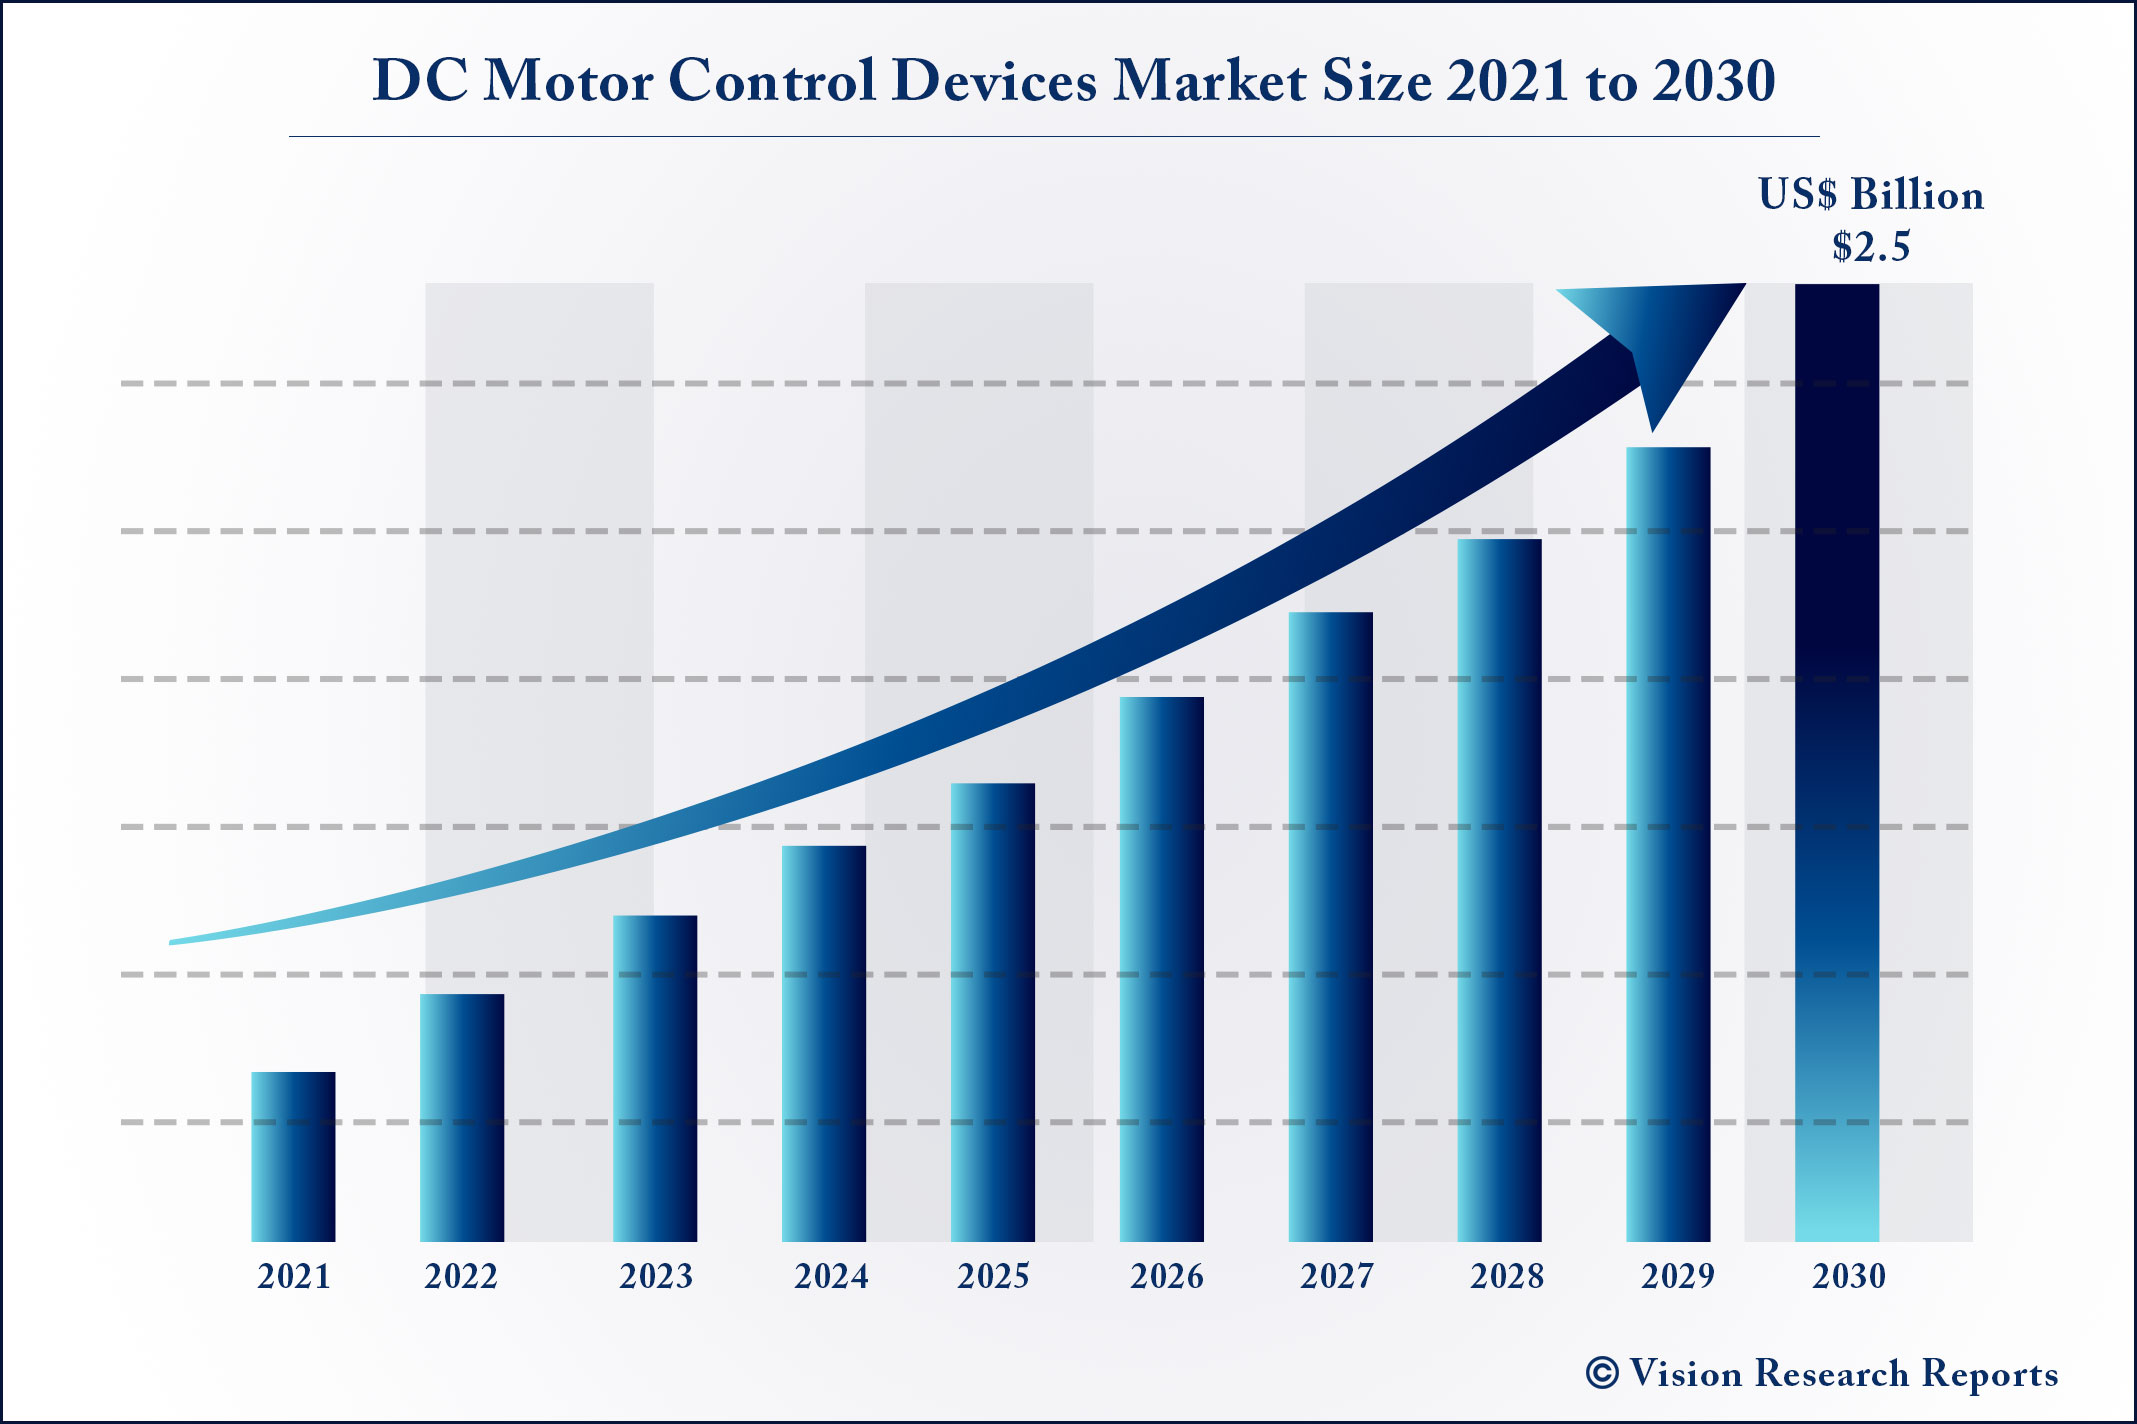 DC Motor Control Devices Market Size 2021 to 2030